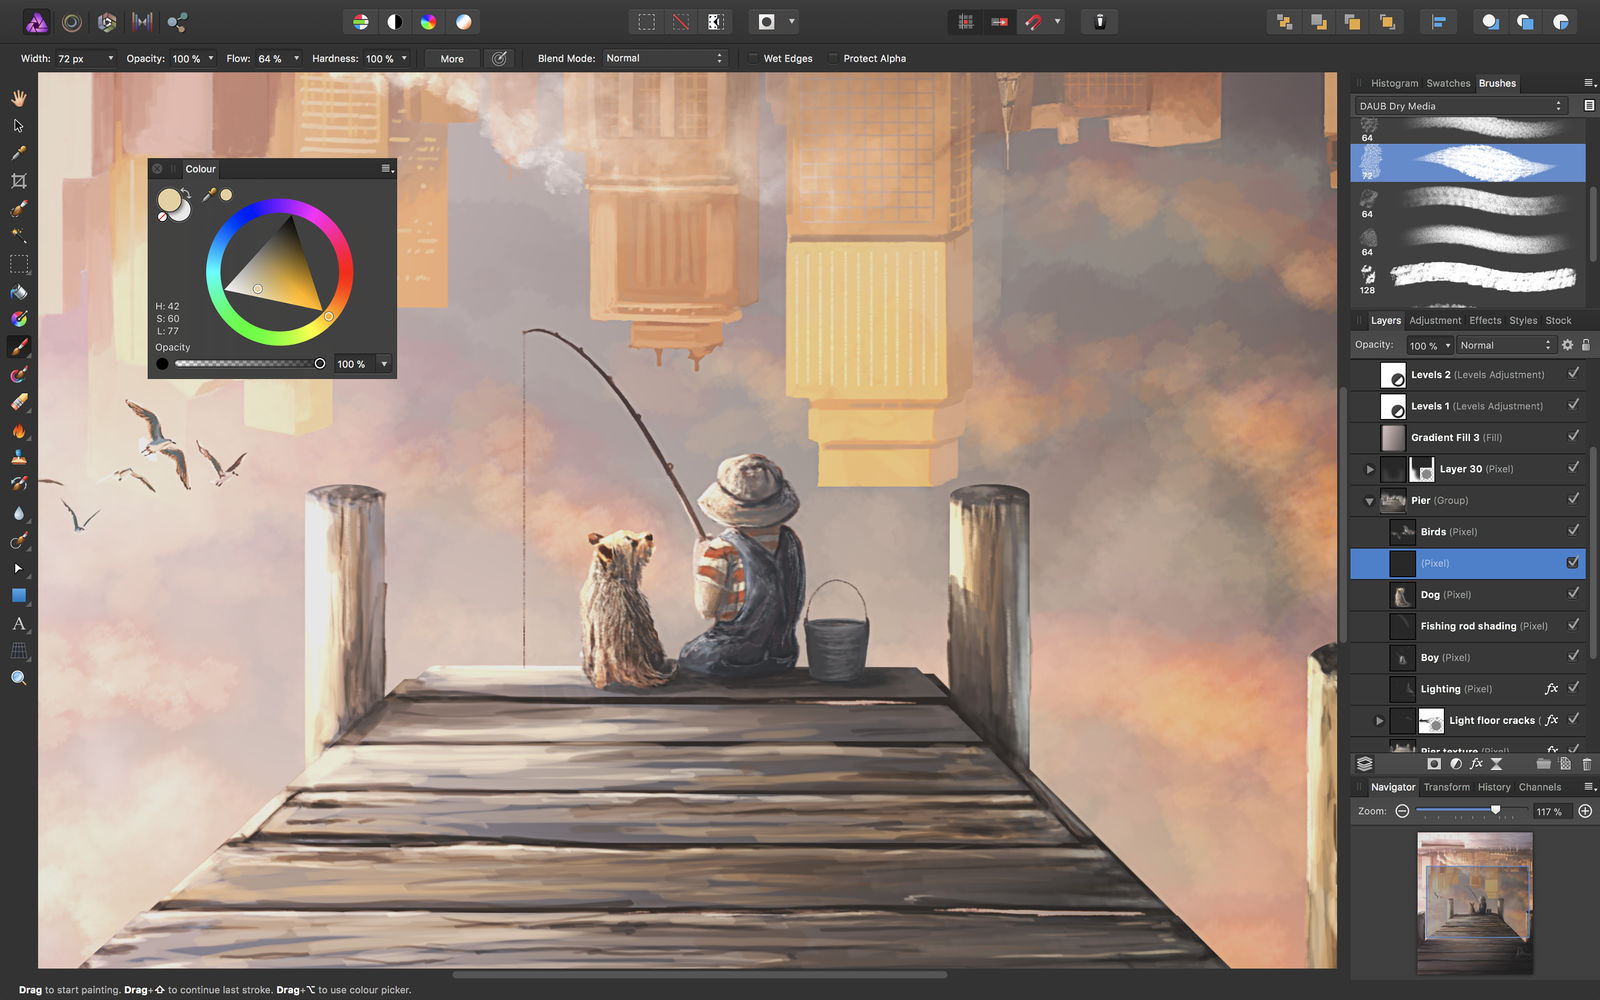 paint for mac online